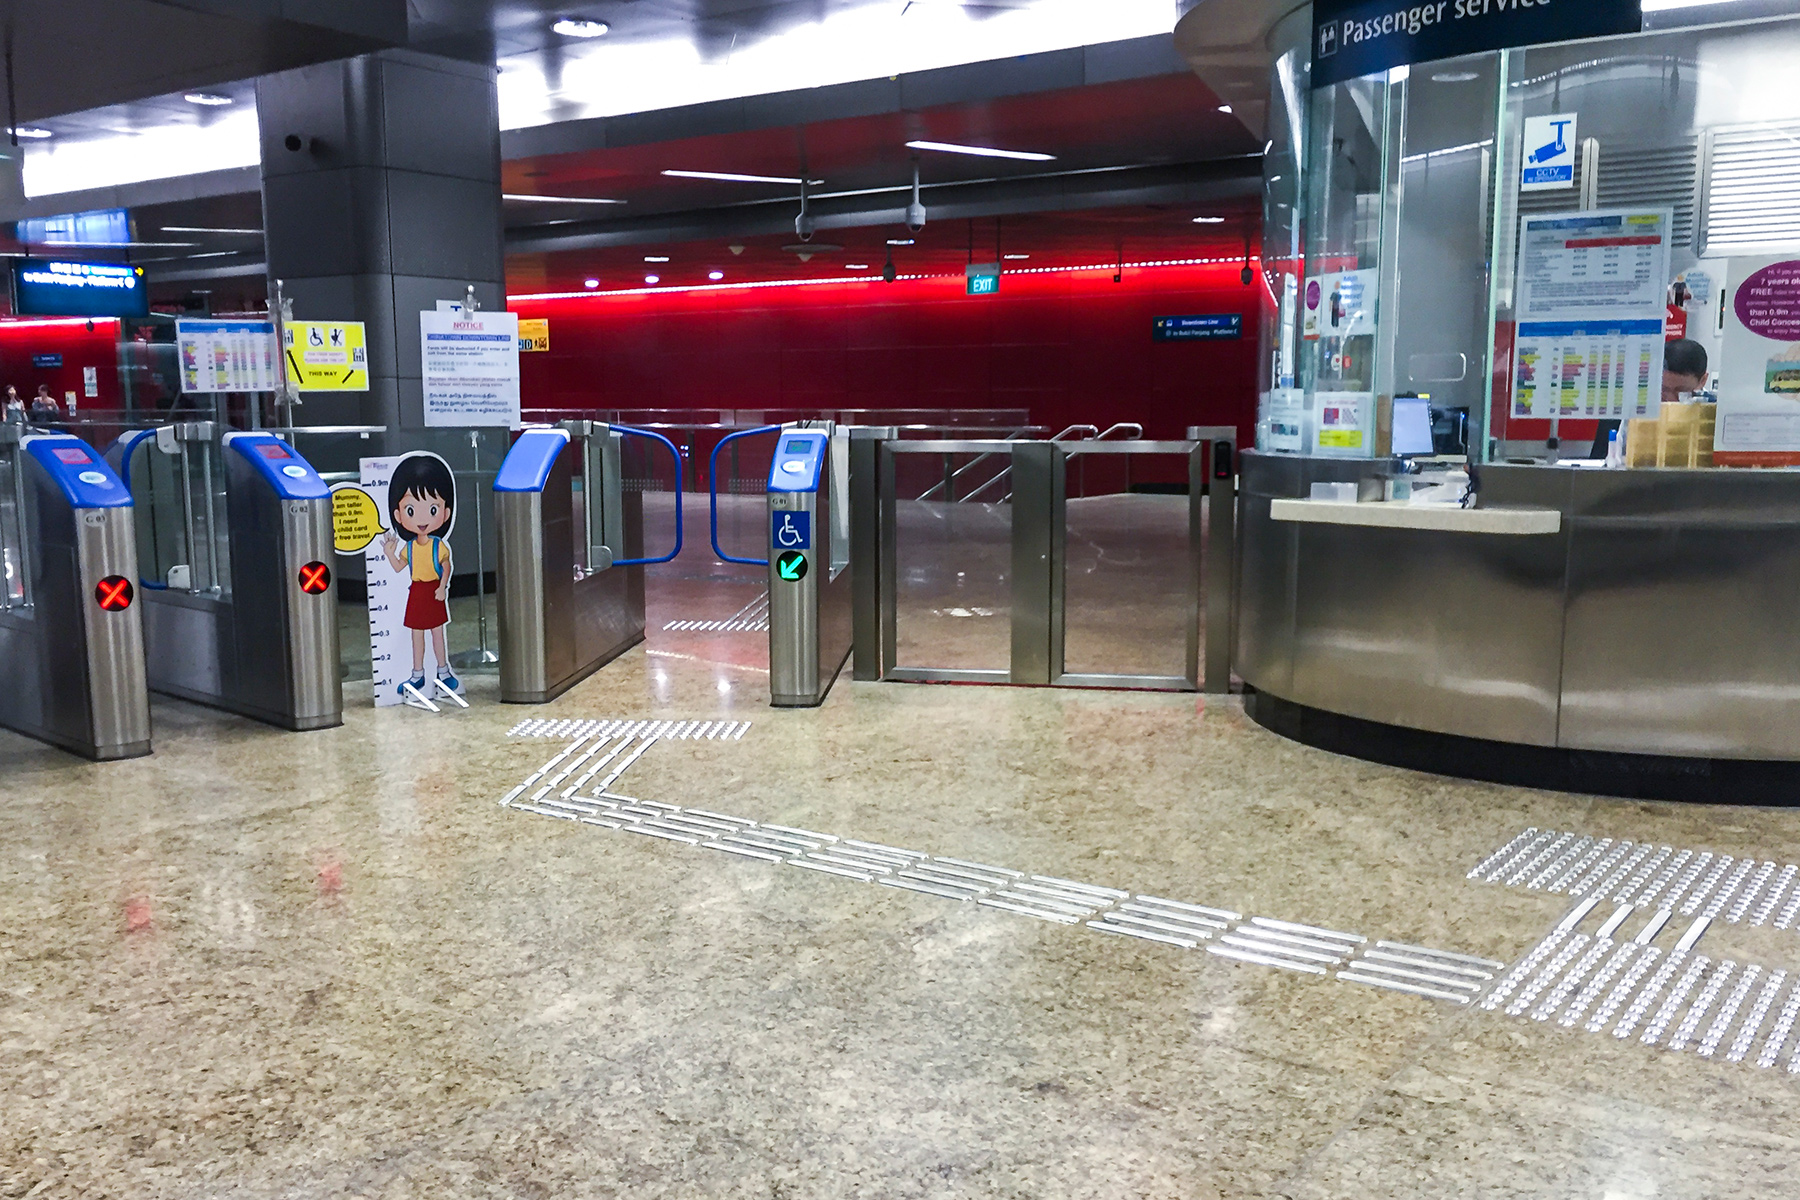 An accessible gate on the MRT